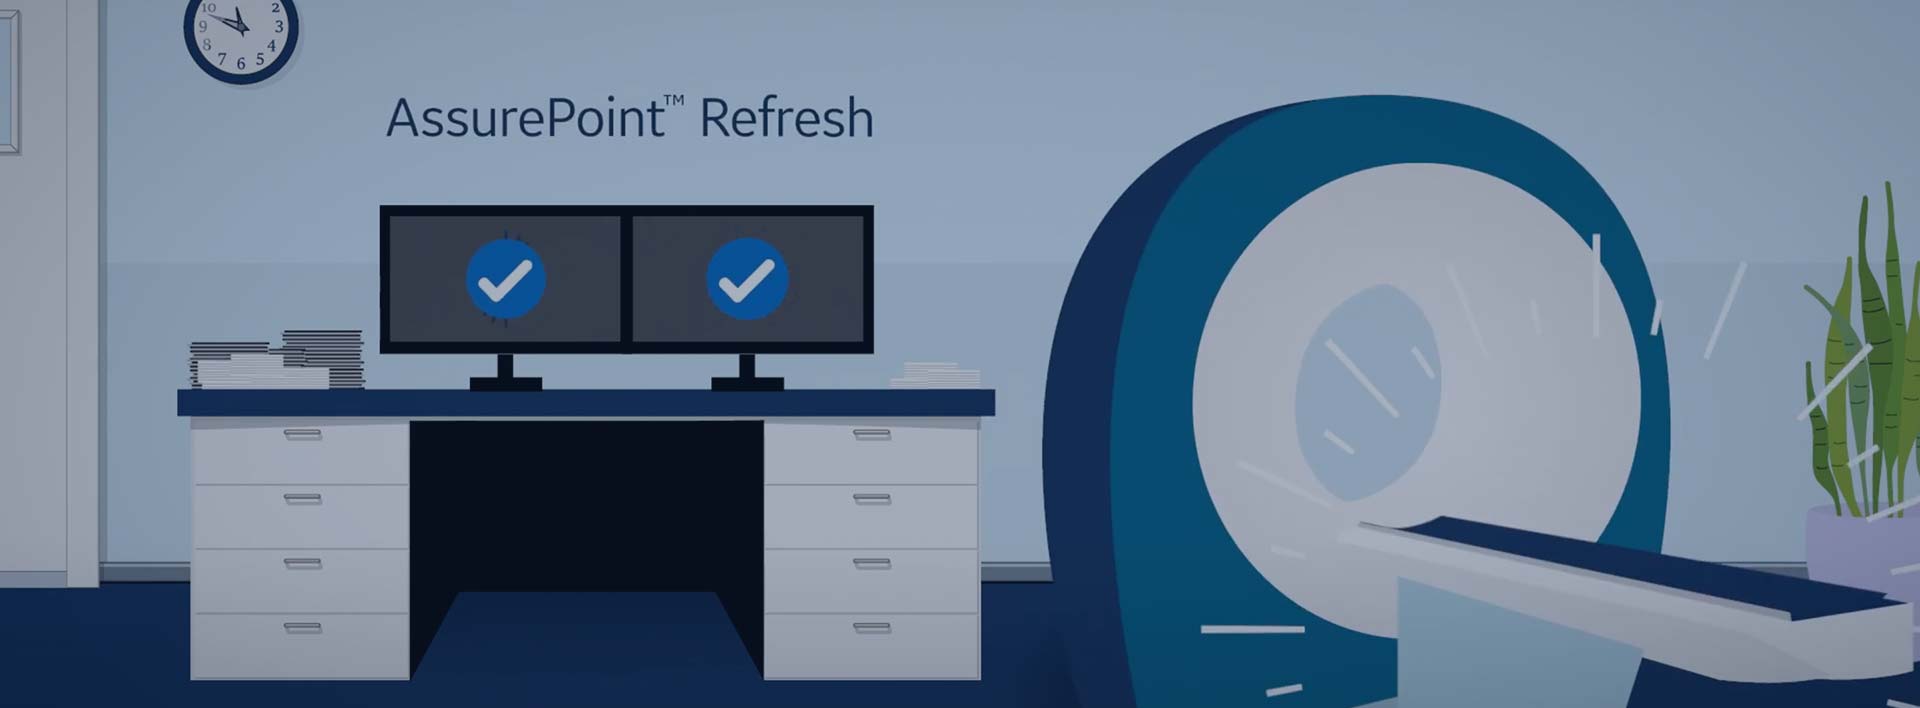 AssurePoint Refresh in use video